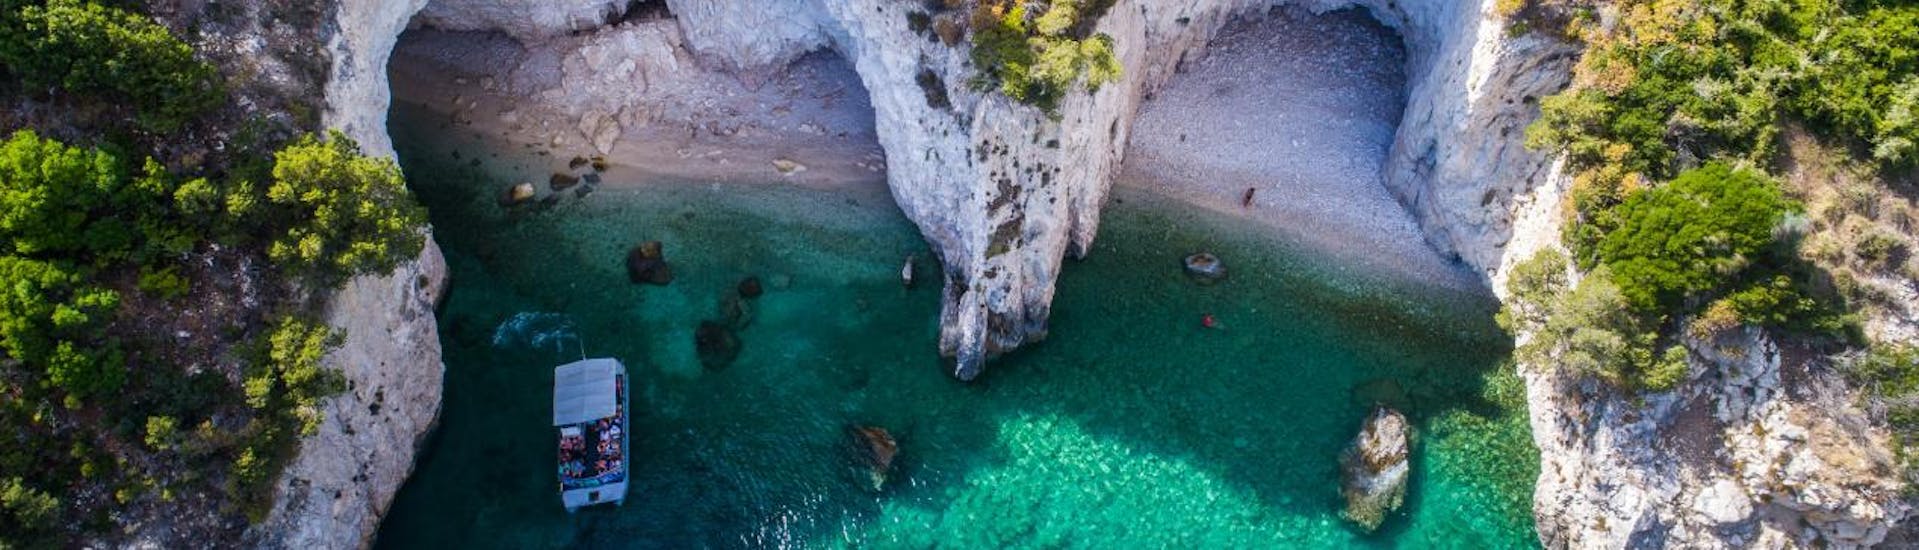 View of the caves that can be visited on the Private Boat Trip to Keri Caves and Shipwreck with Traventure Zakynthos.